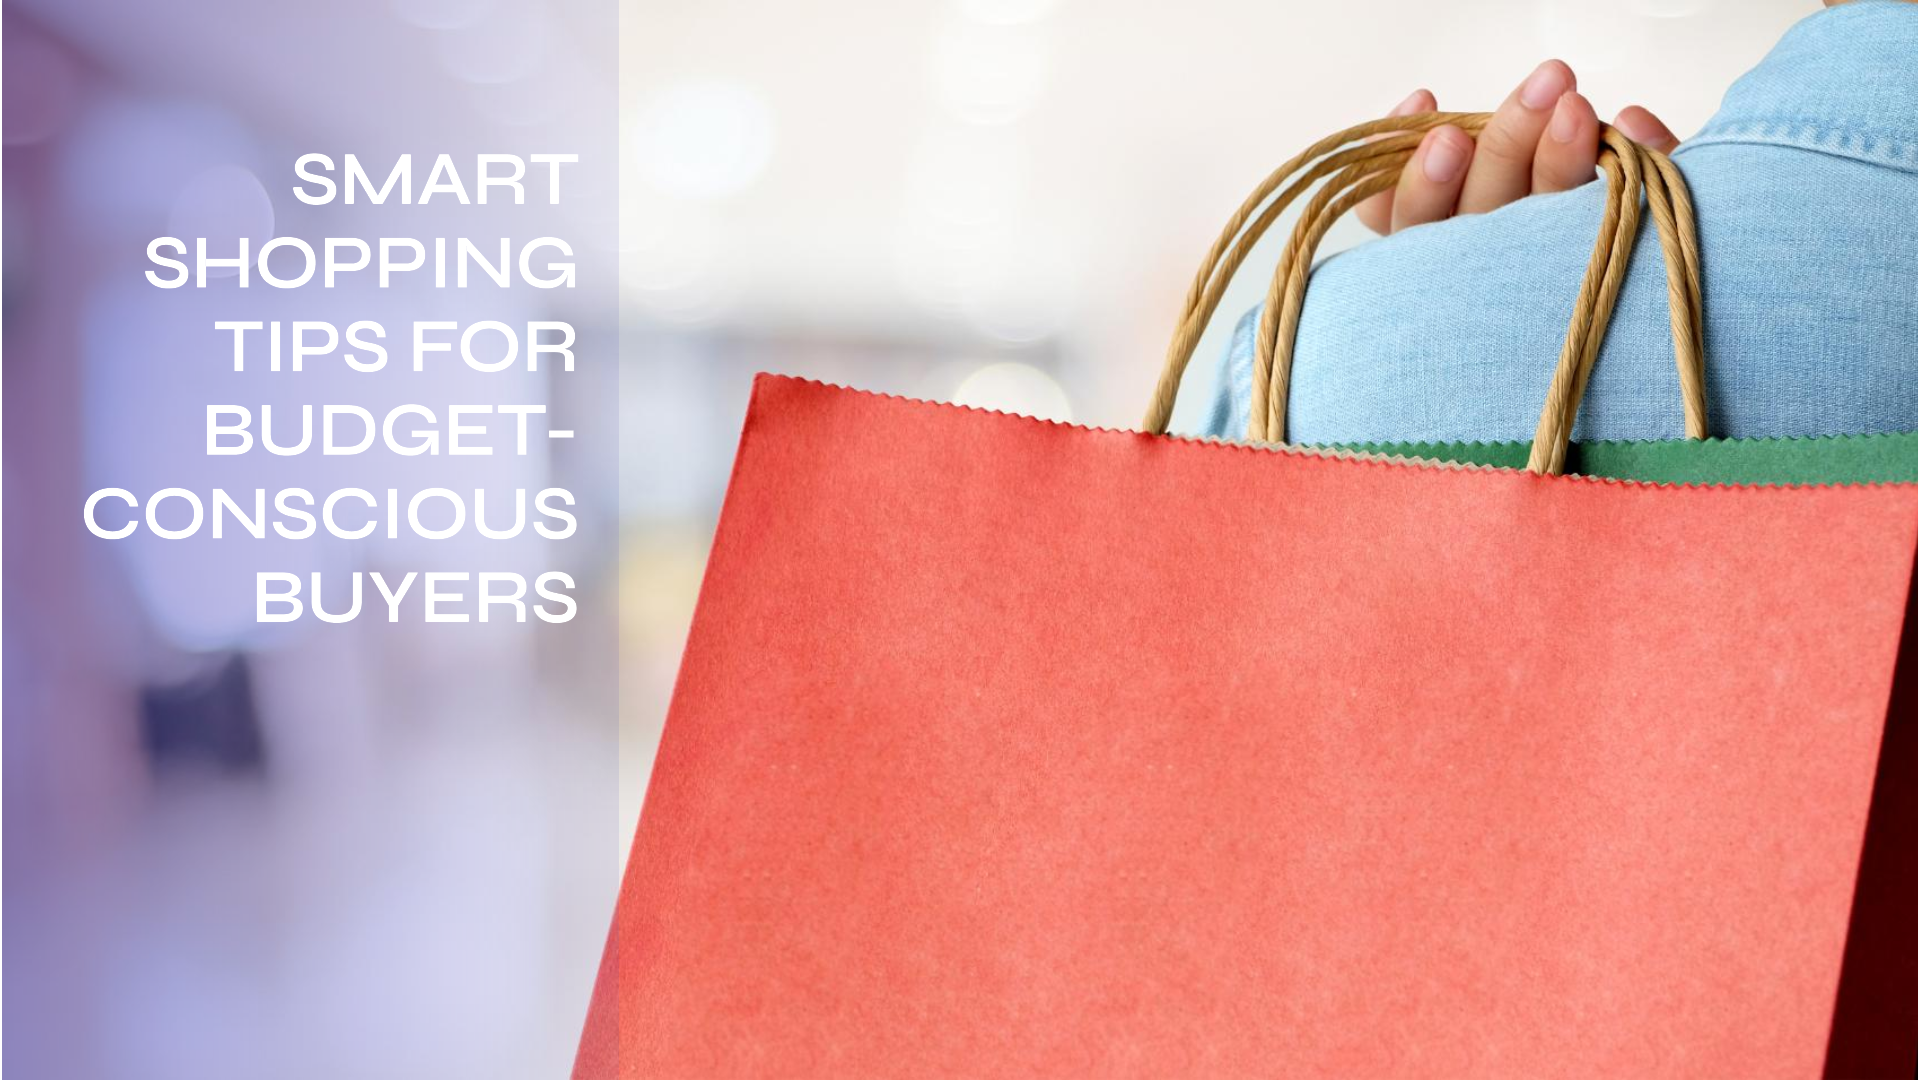 what can help you meet your budget while shopping for important items?